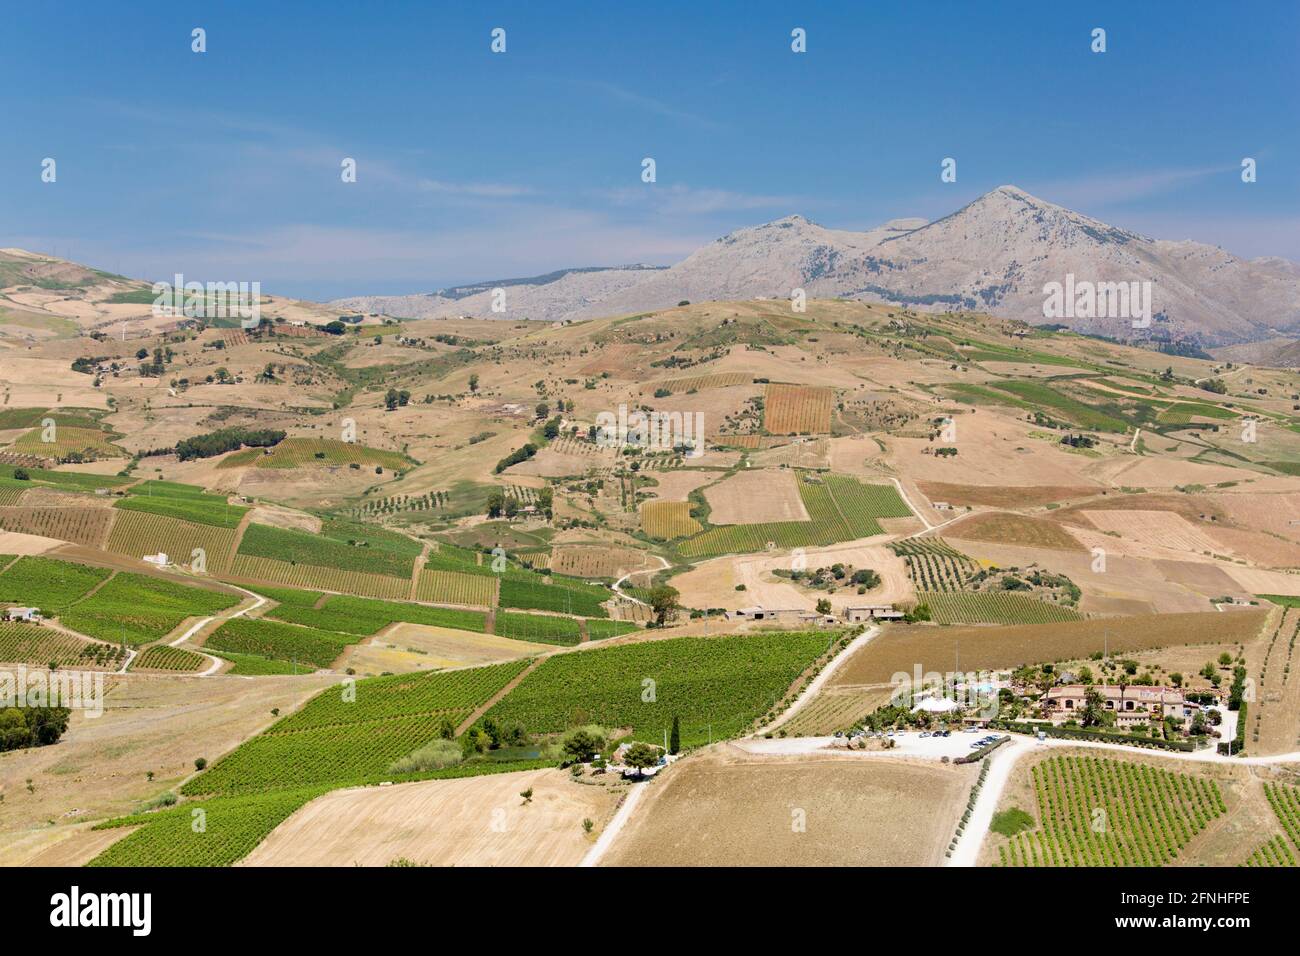 Calatafimi-Segesta, Trapani, Sicily, Italy. View over typical agricultural land from the slopes of Monte Bàrbaro, Segesta archaeological site. Stock Photo